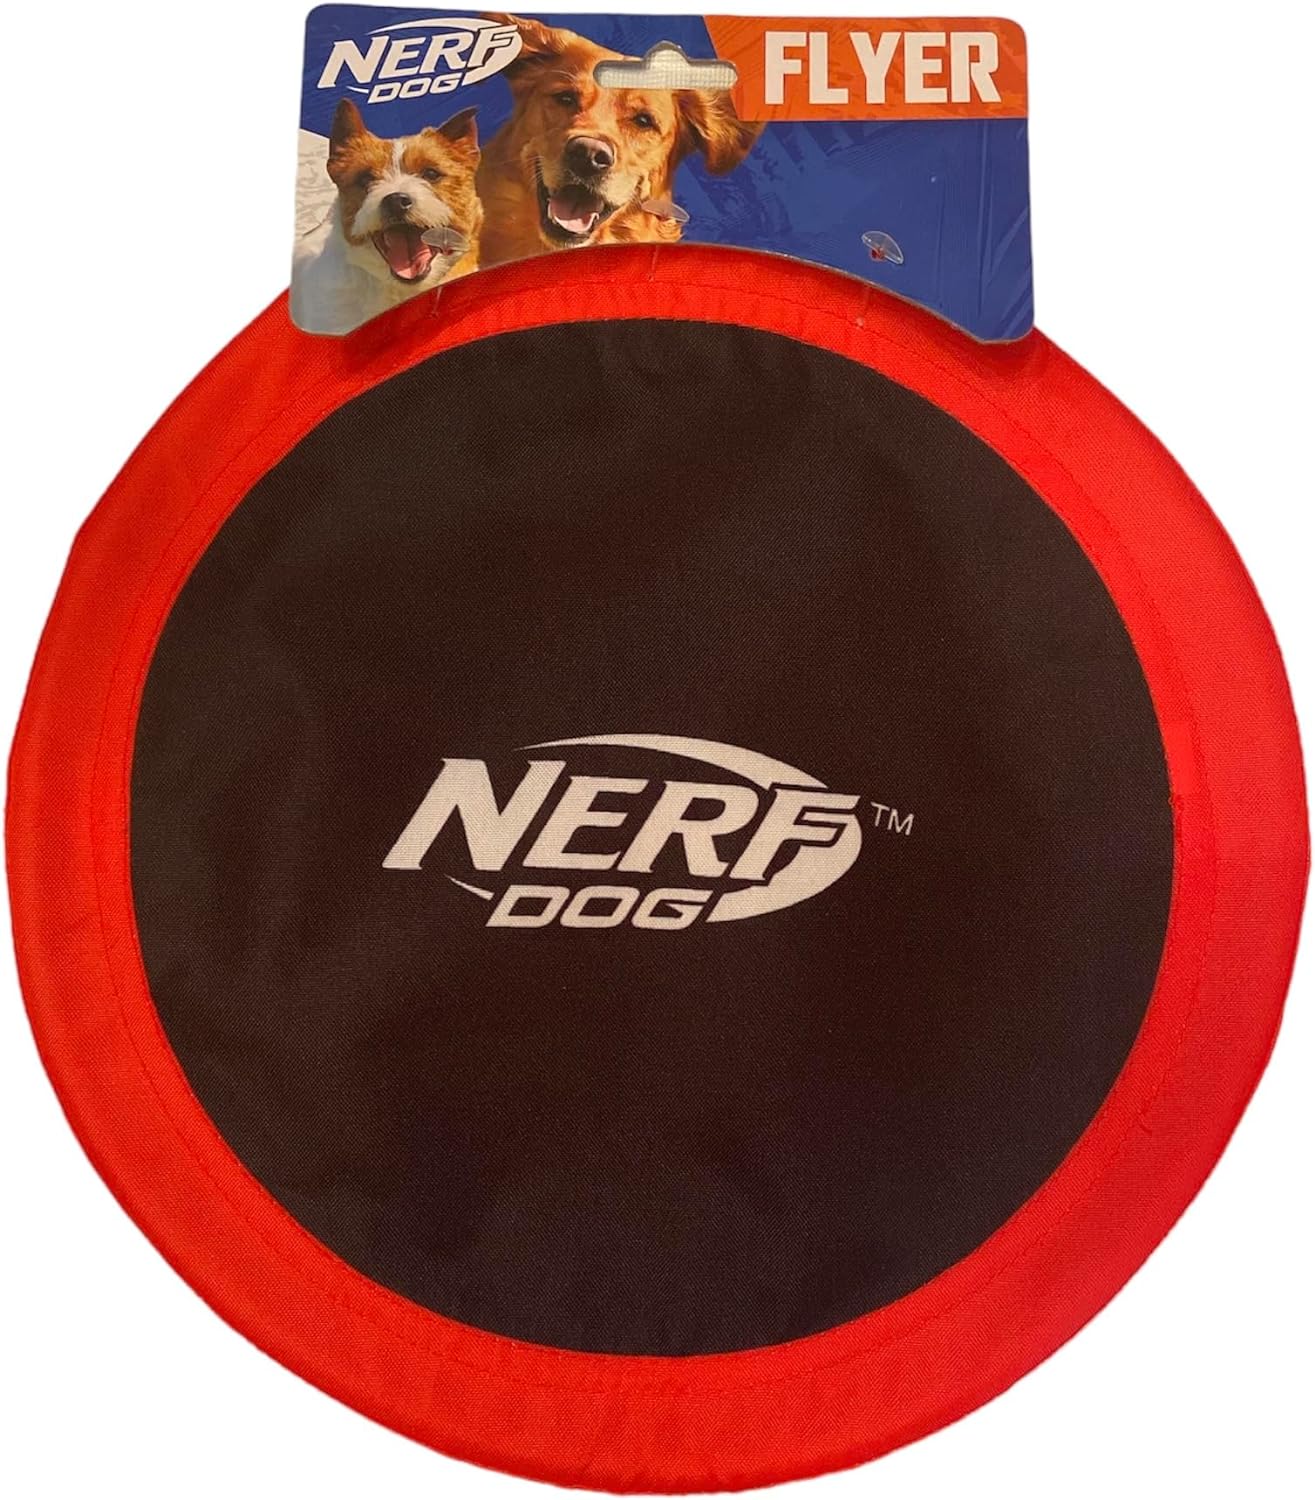 I had been looking for a better option than the kong rubber style frisbee for a while now. If youre on the same search, look no further. This thing flys like a normal frisbee, and is tough as it gets. Played fetch with my 90lb shepherd, and a dutchie today for at least an hour, and this frisbee still looks brand new!